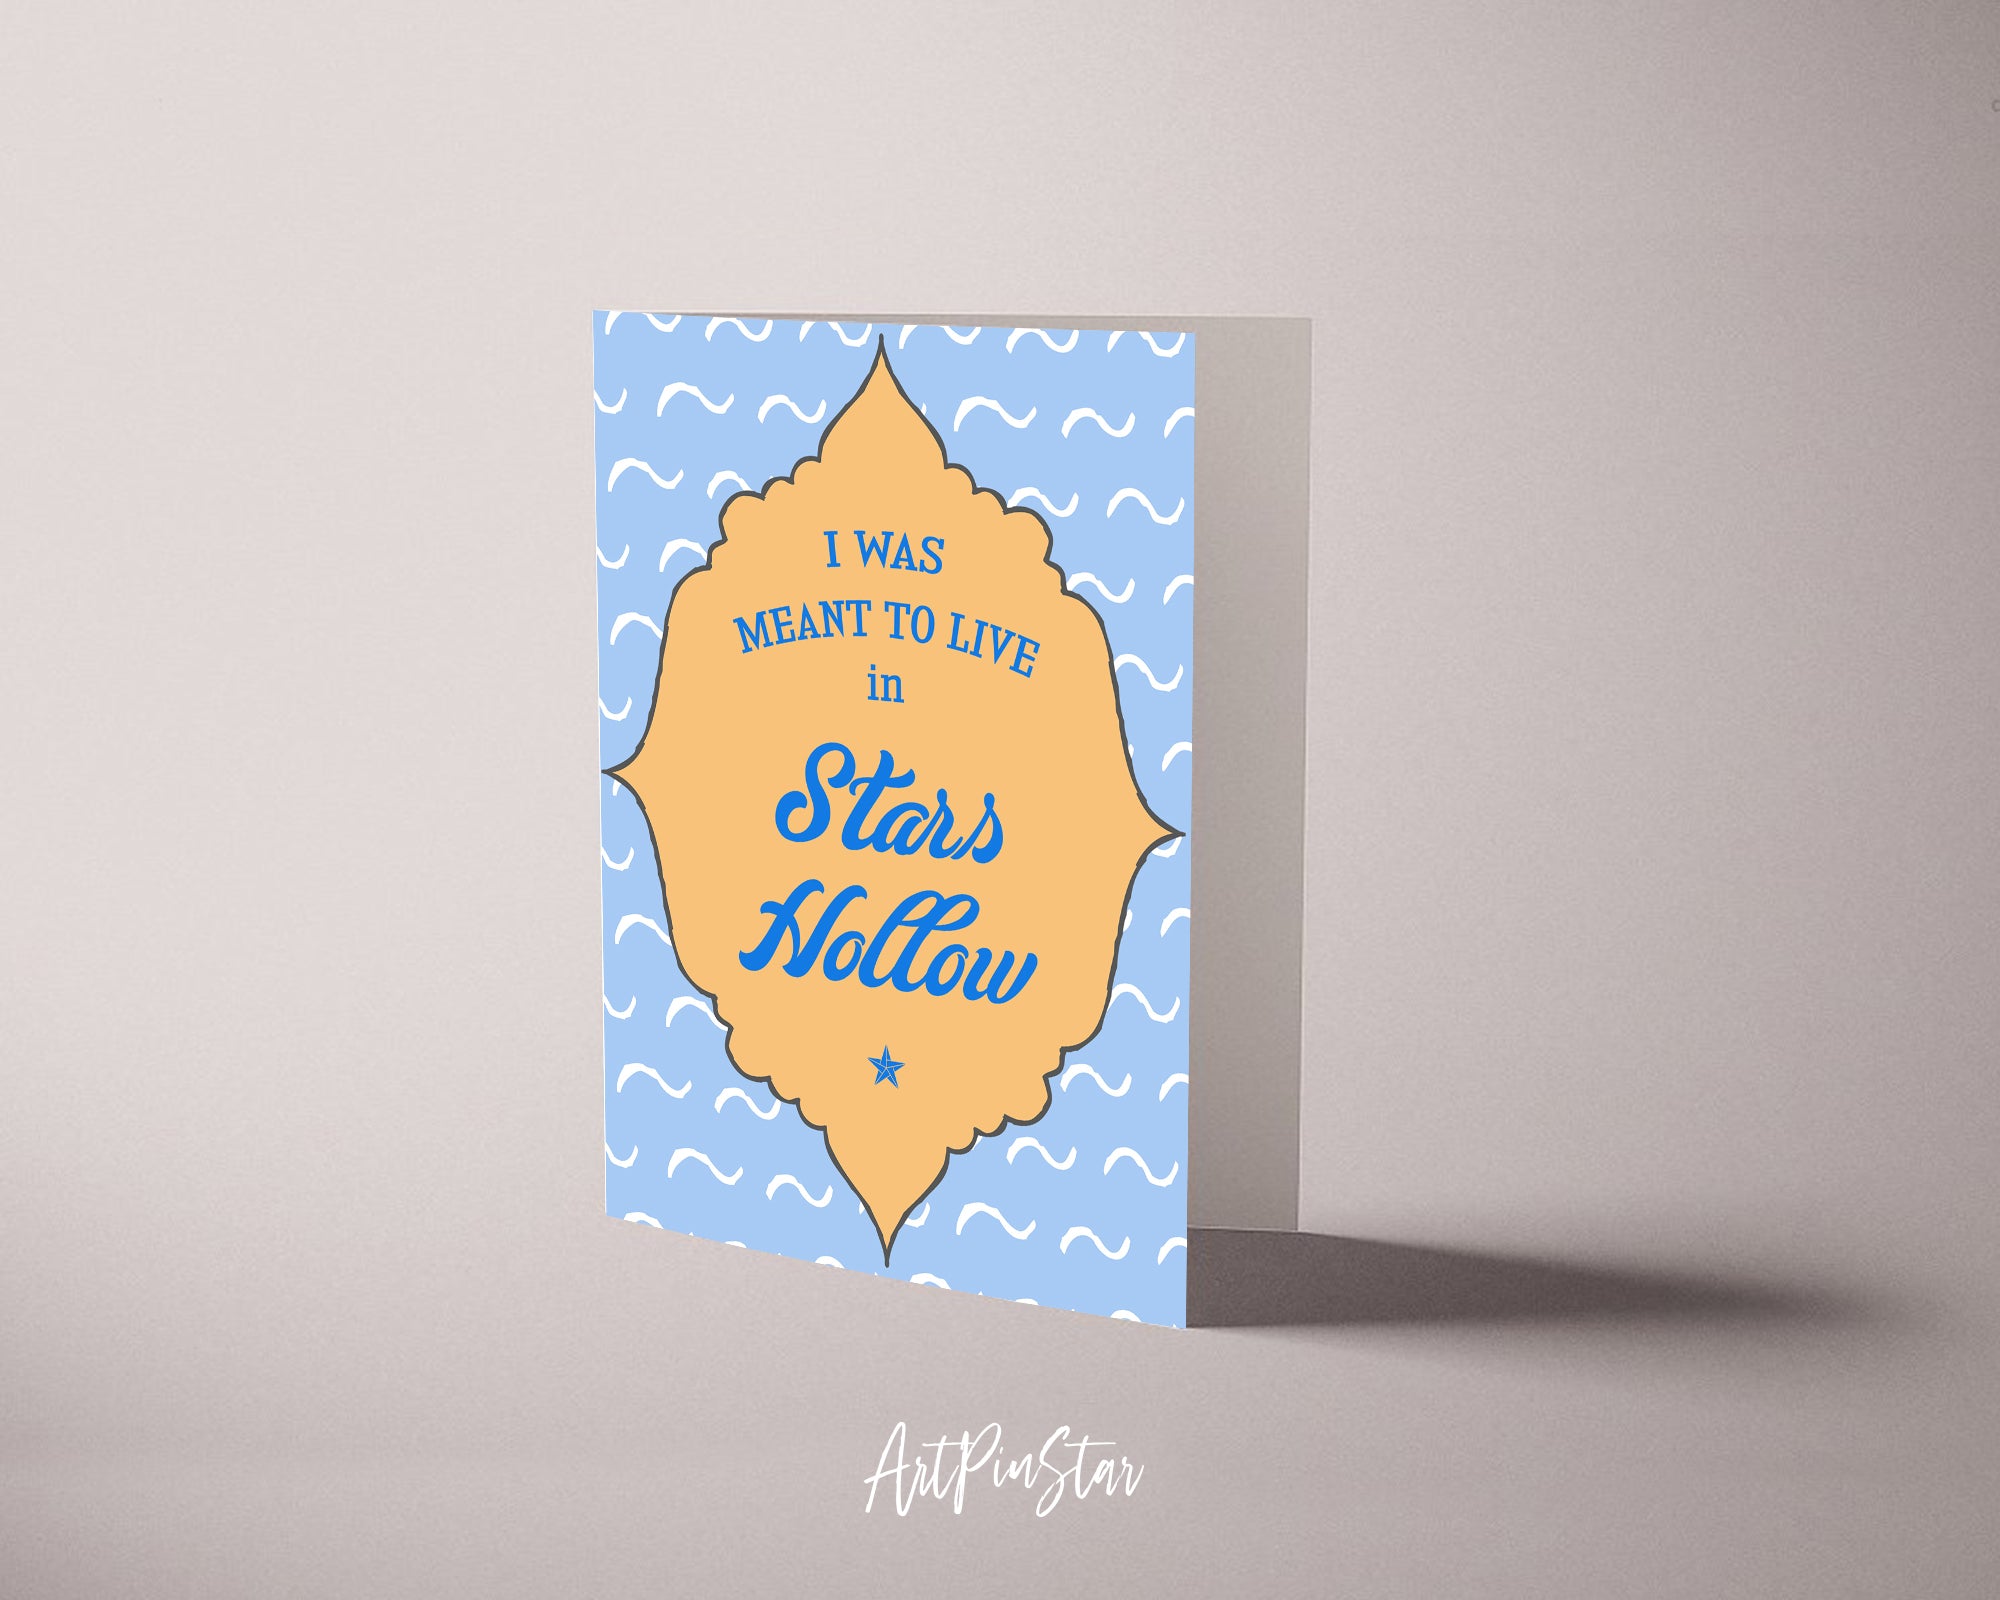 I was meant to live in stars hollow Funny Quote Customized Greeting Cards